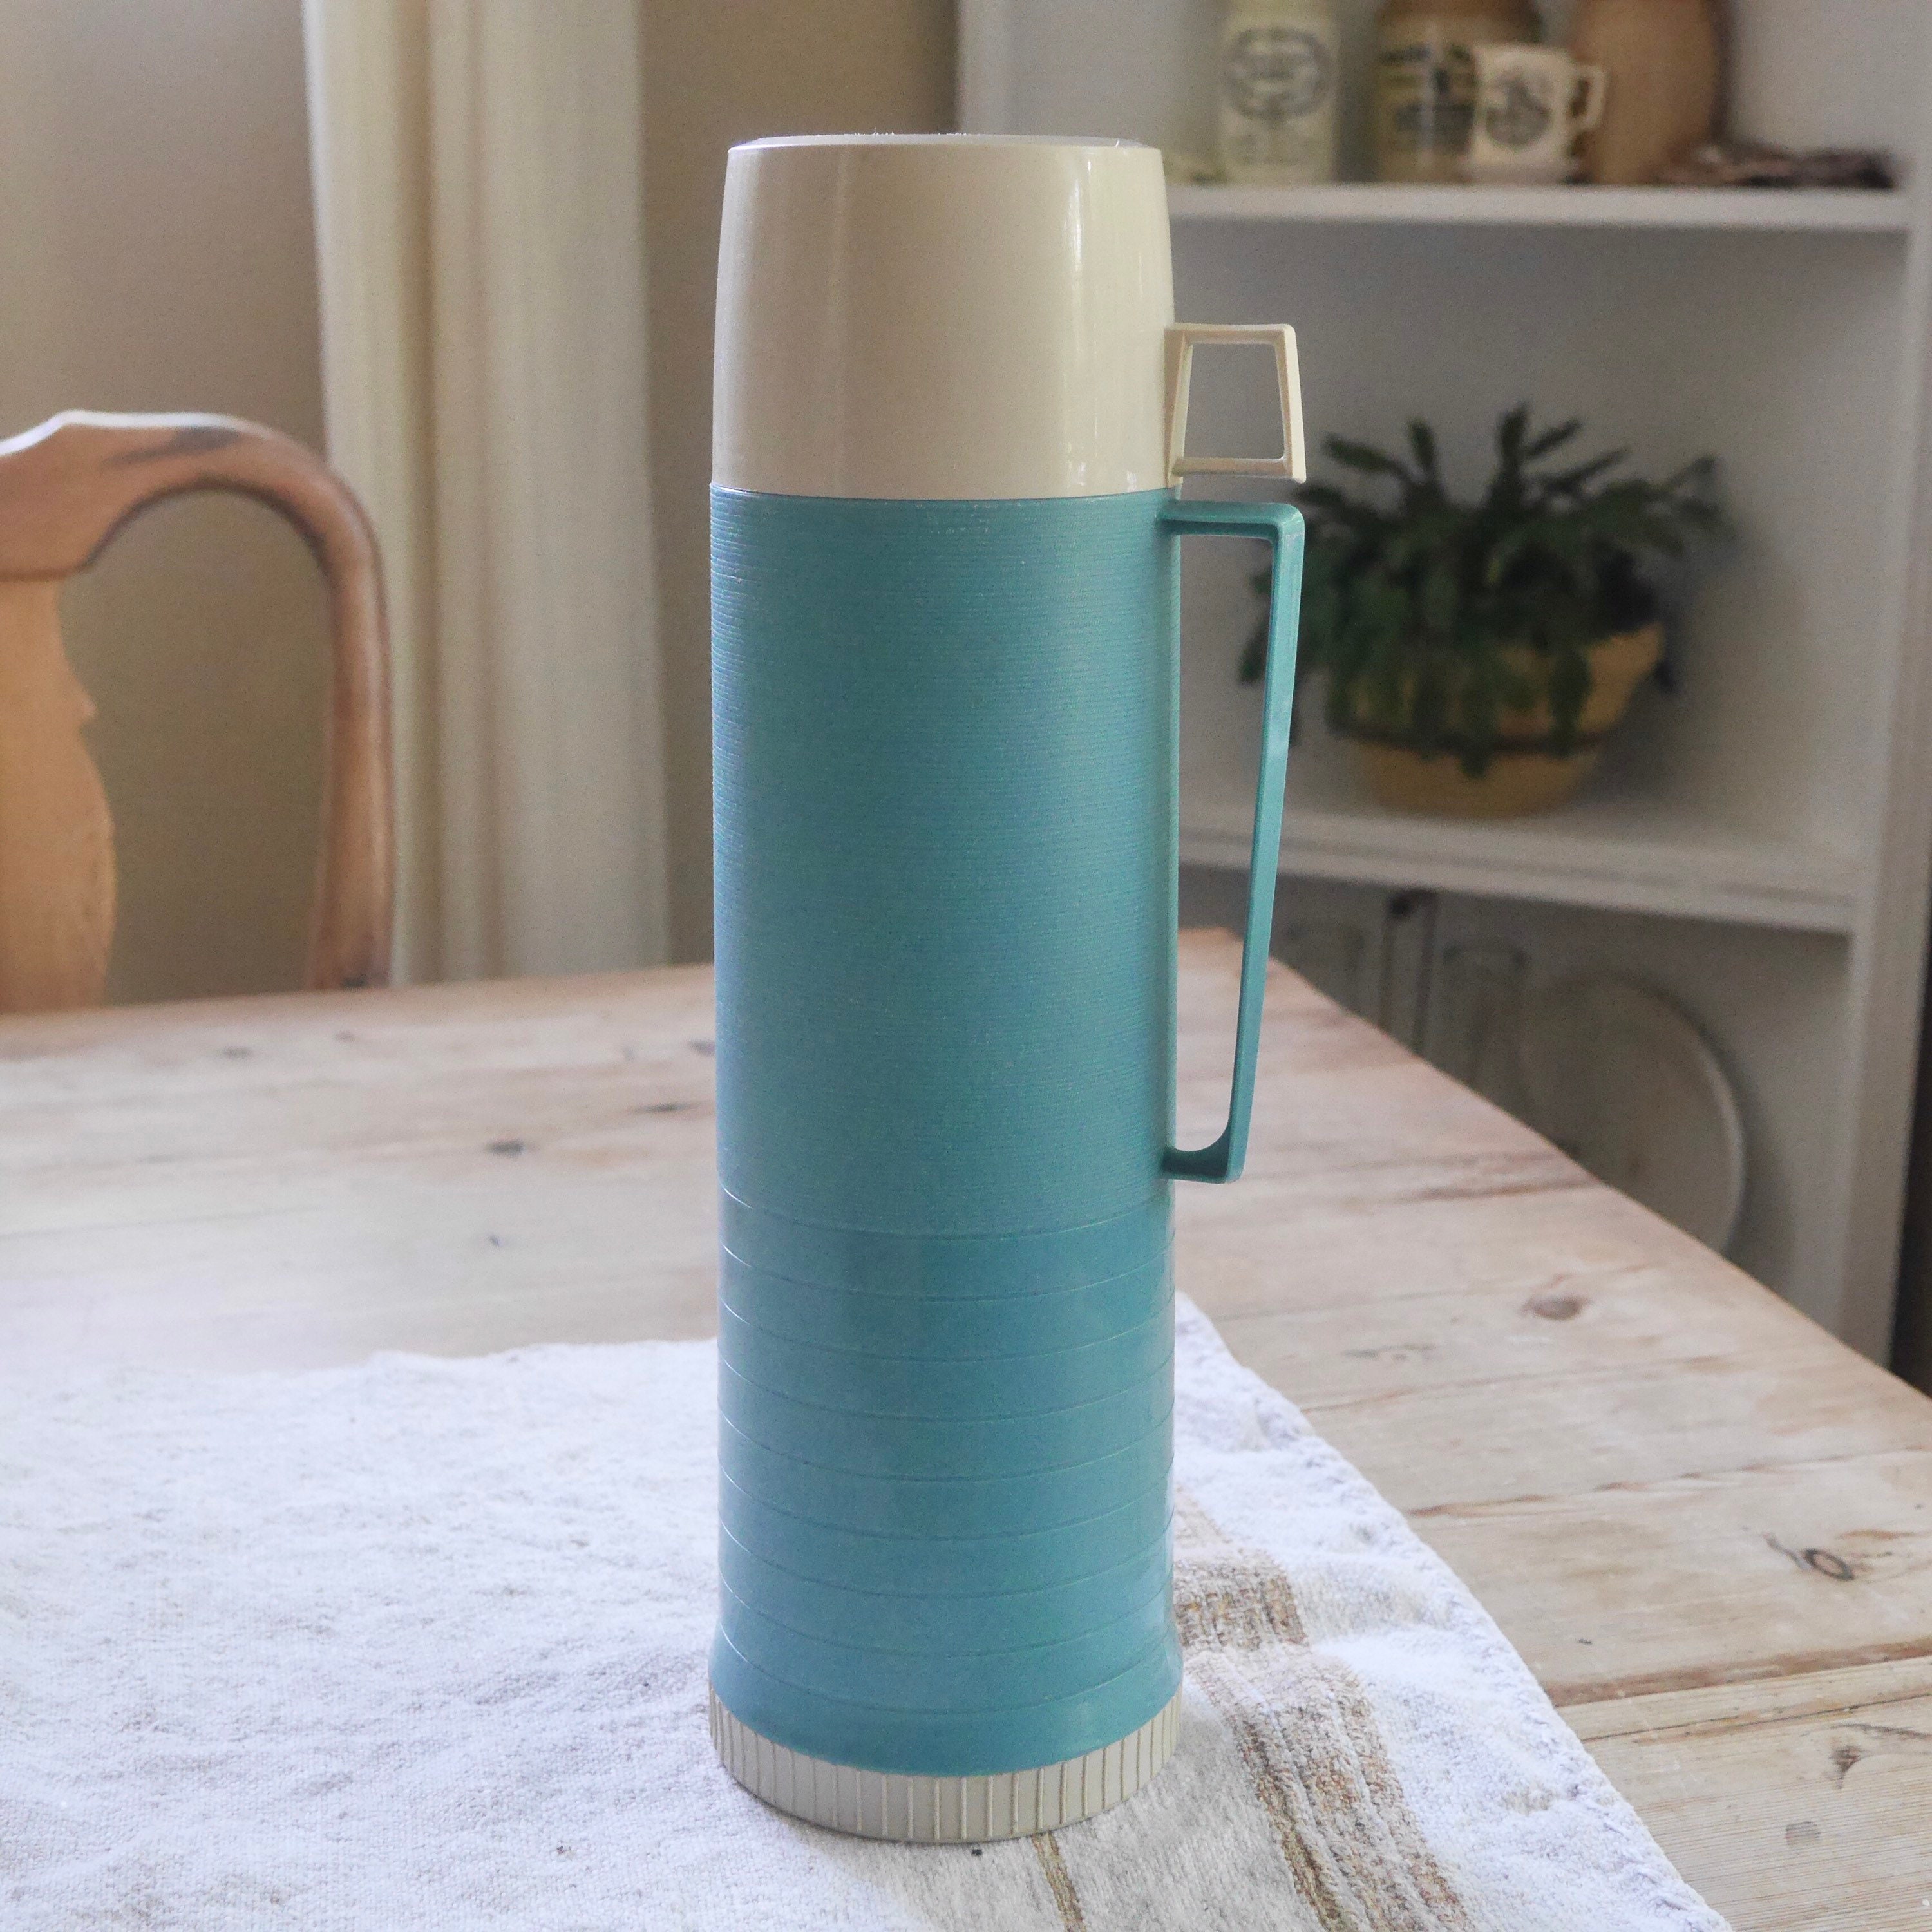 Vintage 1970 Mustard or Baby Blue Thermos Hot Drink Bottles Camping Flask  Retro' Kitchen Decor Collectibles Travel Bottle Farmhouse Decor 